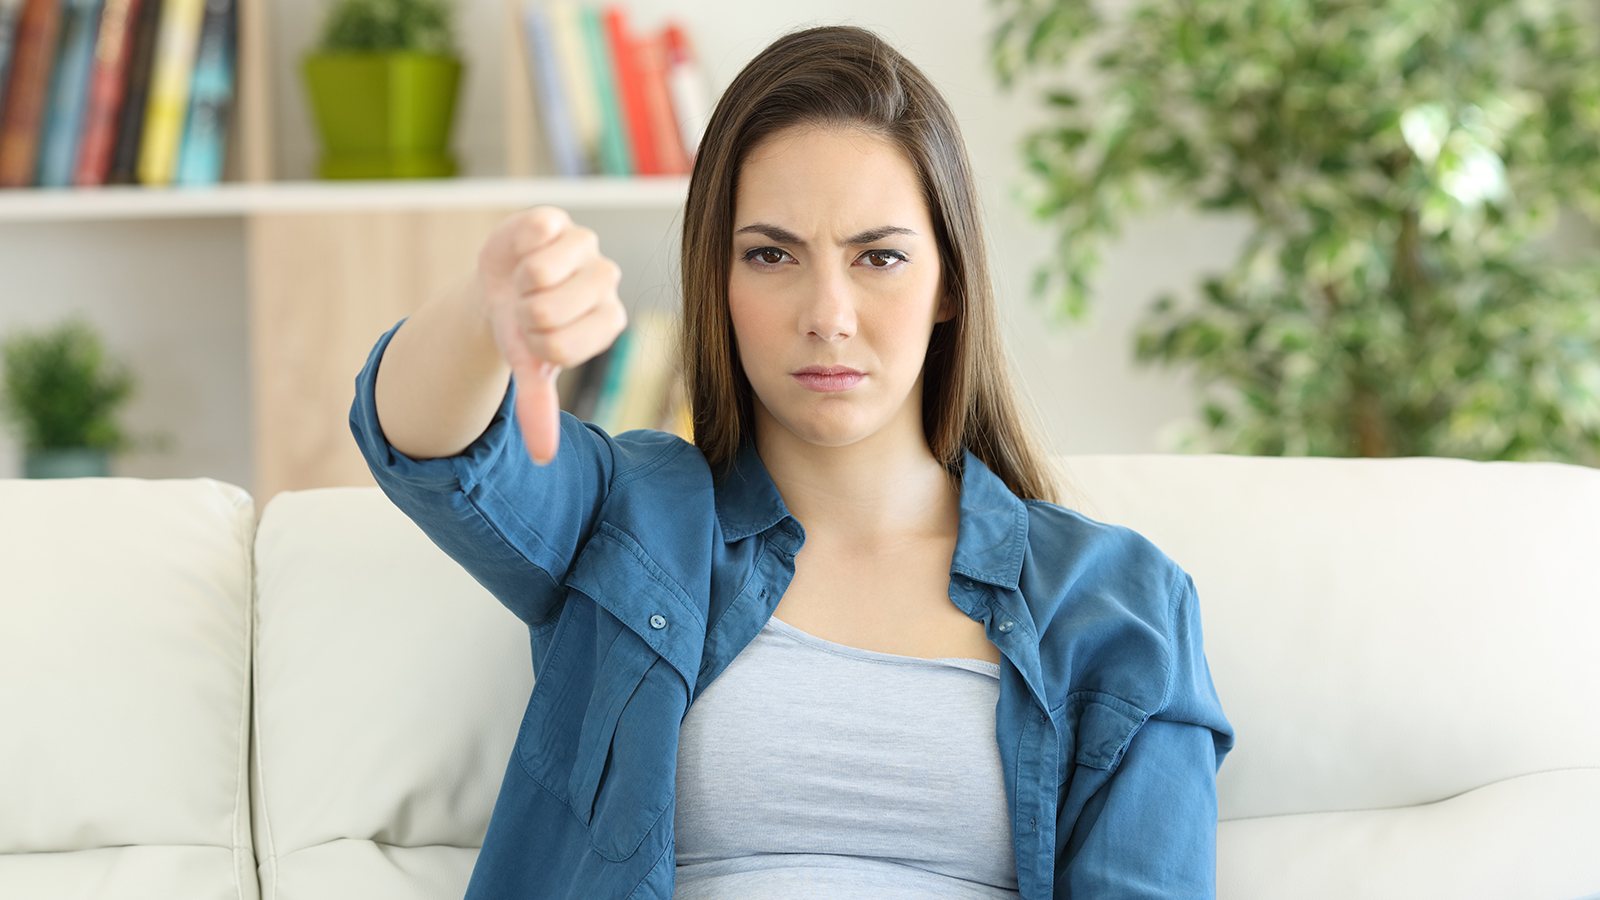 Angry woman looking at camera with thumbs down sitting on a couch in the living room at home